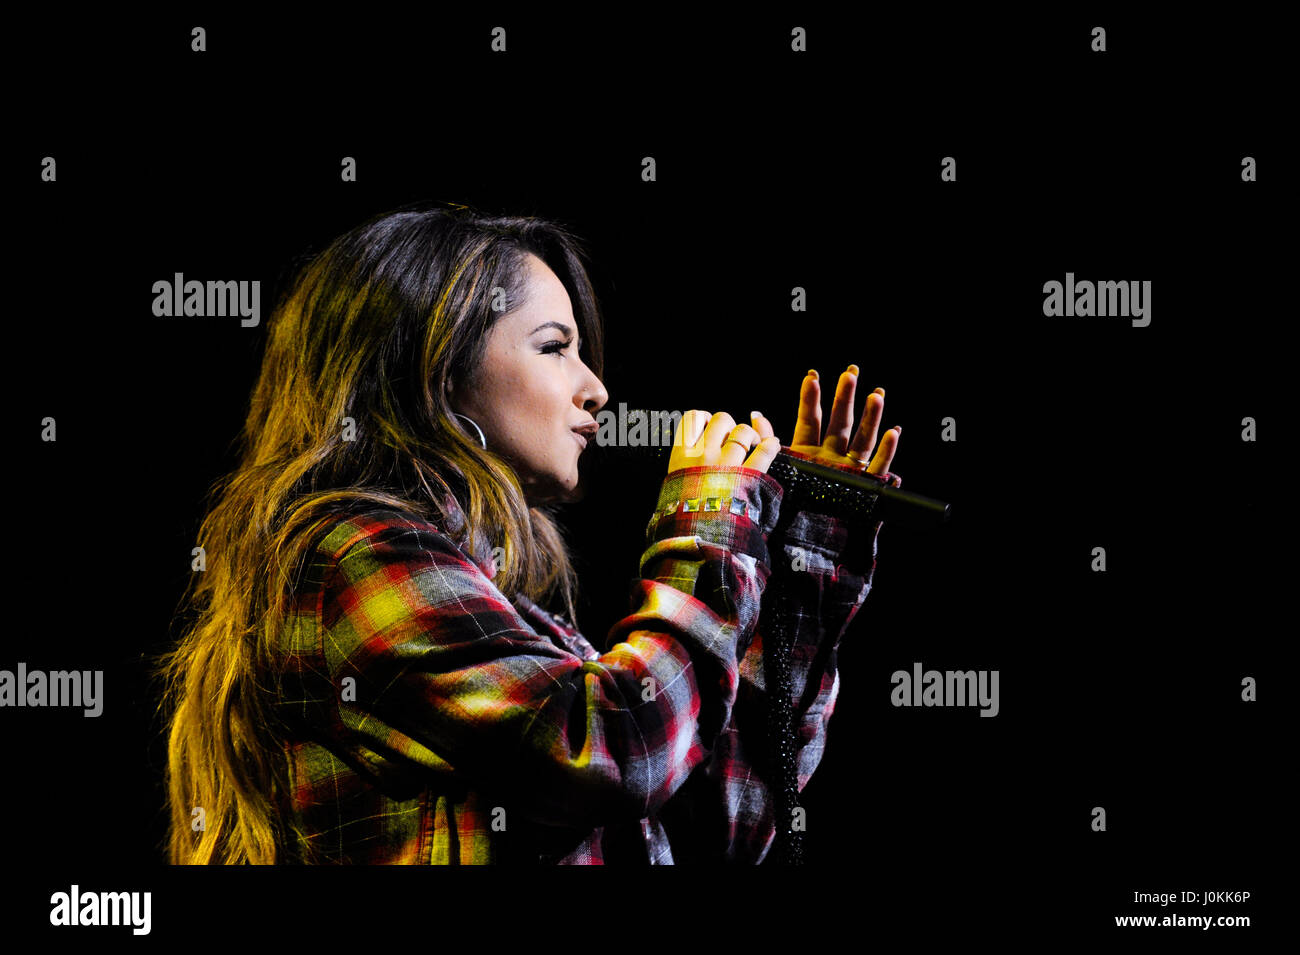 Singer Becky G performs live at The Salvation Army #|#Rock The Red Kettle#|# Concert at Microsoft Theater on December 5th, 2015 in Los Angeles, California. Stock Photo